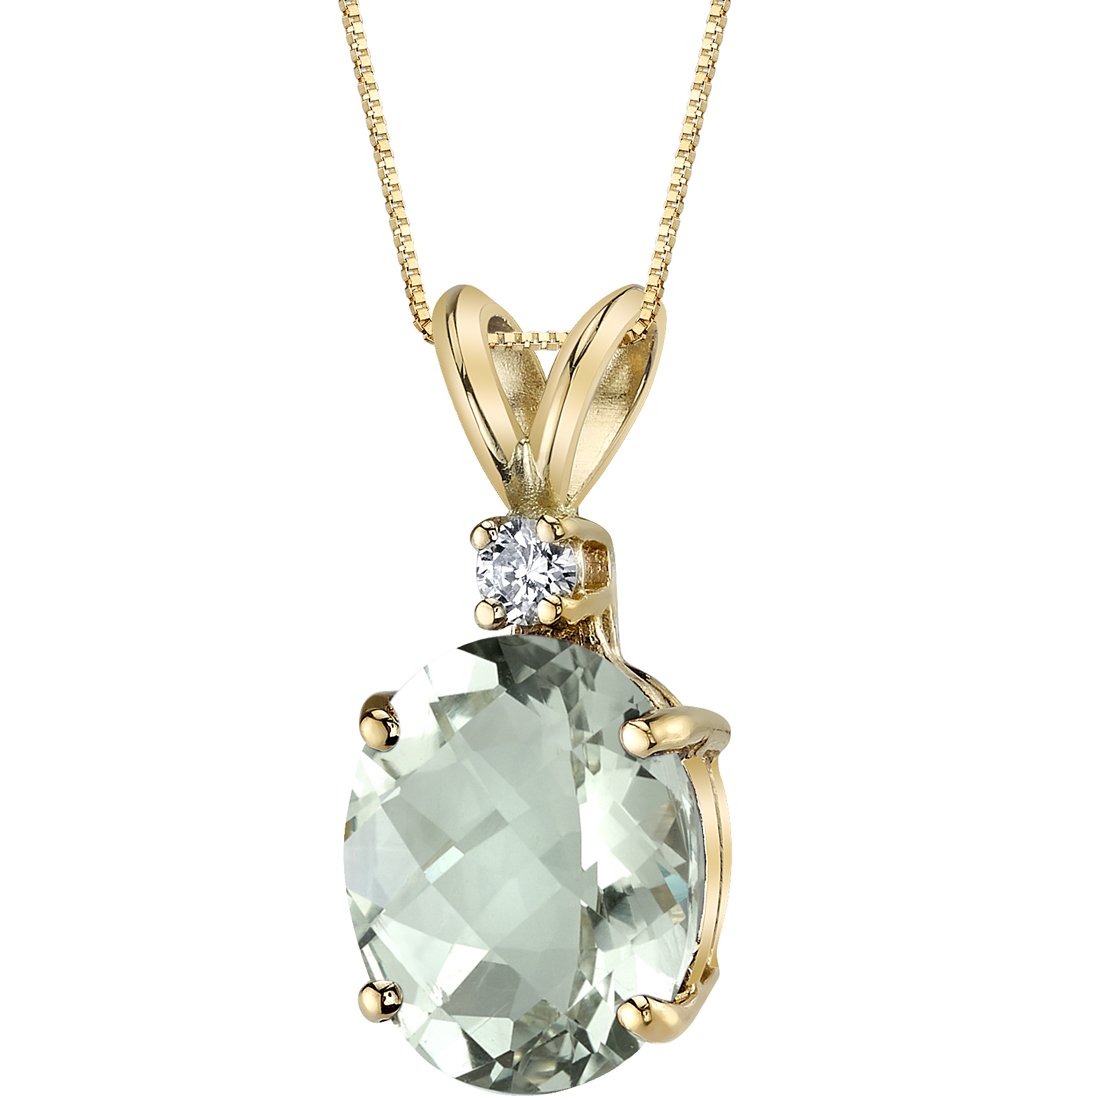 Peora Green Amethyst with Genuine Diamond Pendant in 14K Yellow Gold, Elegant Solitaire, Oval Shape, 10x8mm, 2.30Carats total